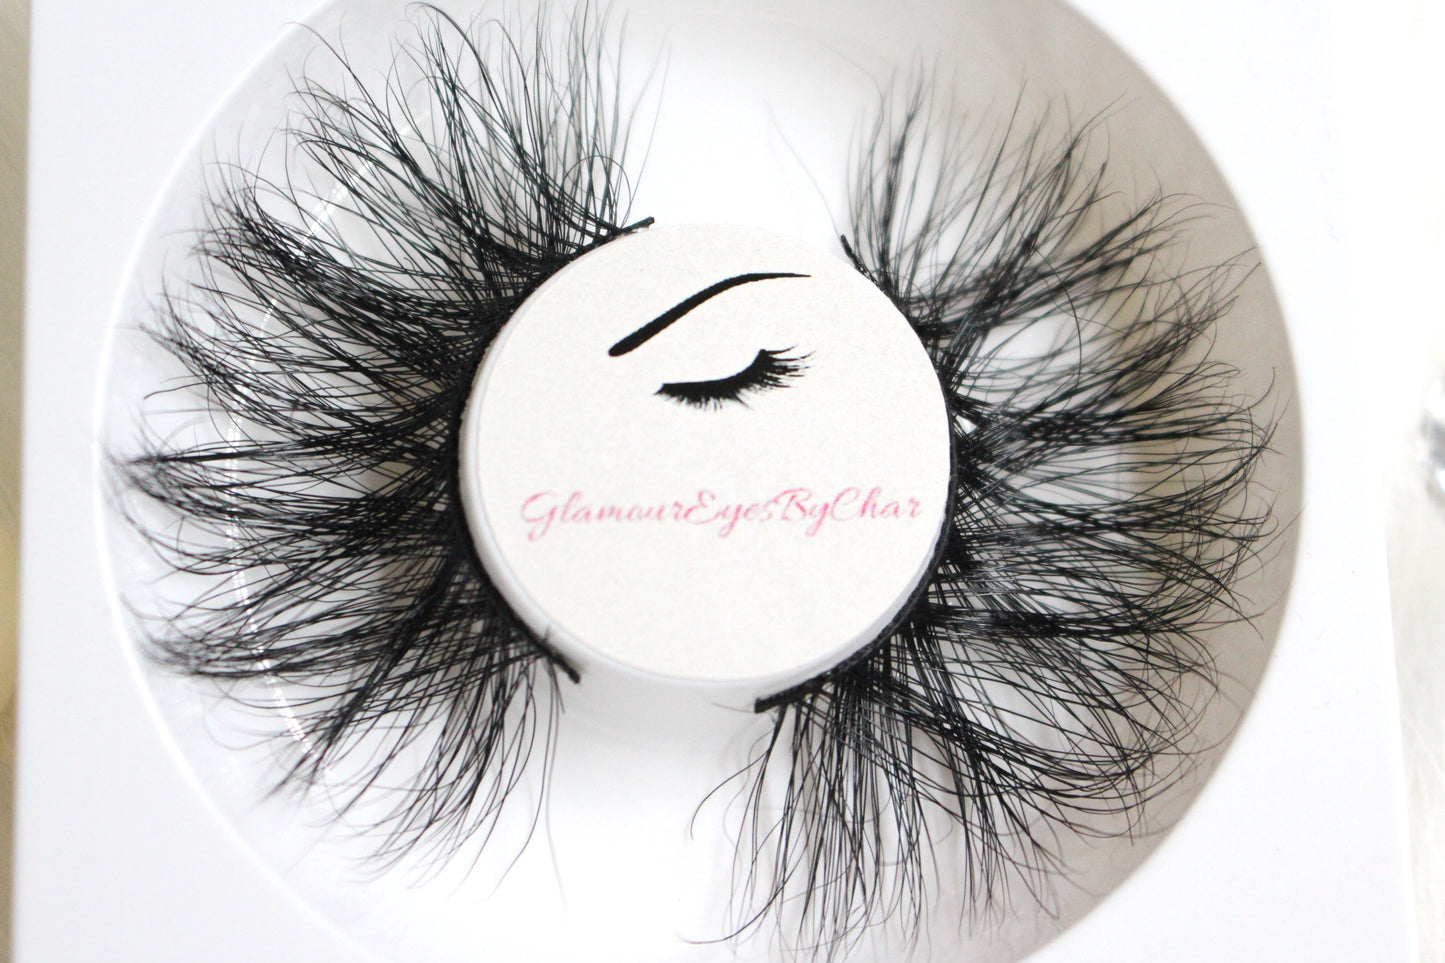 These 5D luxurious mink lashes are called Wispy and are 25mm in length. They are very dramatic, wispy, have a criss cross style, lightweight, and comfortable to wear on the lids. The thin lashband, makes the application process a breeze.  Wispy are suitable for dramatic eye looks and can be worn up to 25 times if handled with care. 